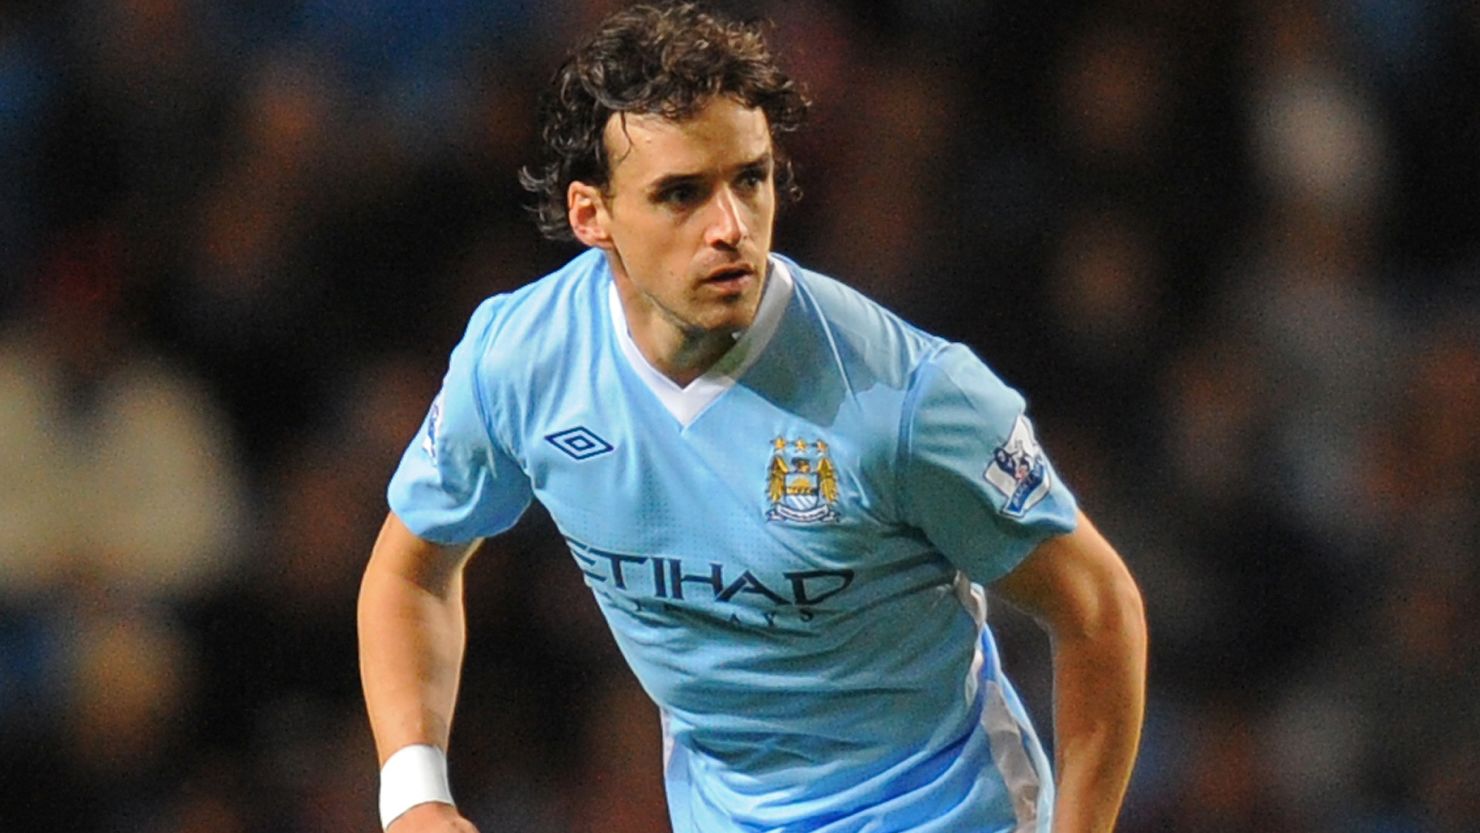 Owen Hargreaves played nearly an hour for Manchester City in his debut on Wednesday.